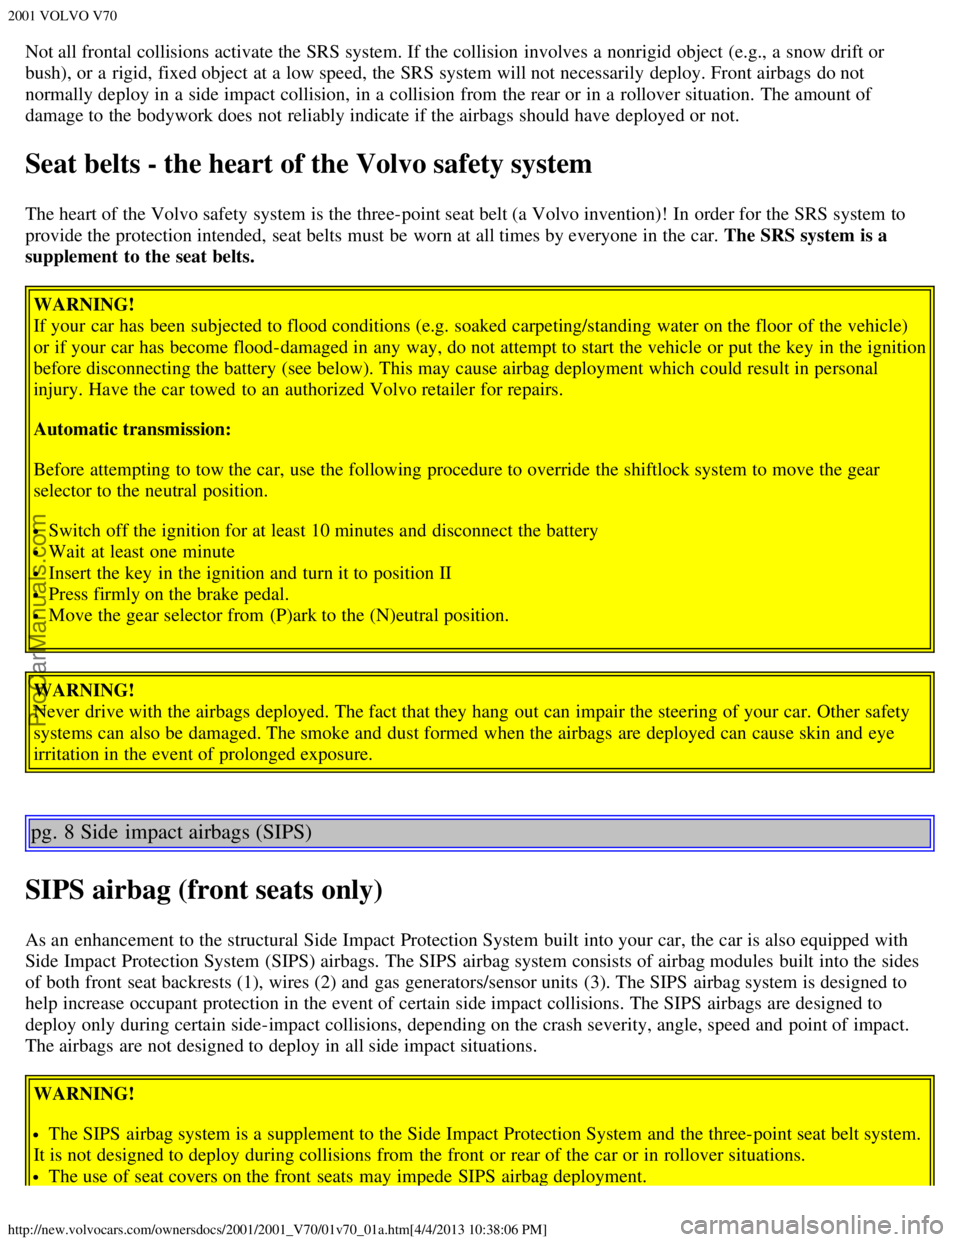 VOLVO V70 2001  Owners Manual 2001 VOLVO V70
http://new.volvocars.com/ownersdocs/2001/2001_V70/01v70_01a.htm[4/4/2013 10:38:06 PM]
Not all frontal collisions activate the SRS system. If the collision  involves a  nonrigid object  